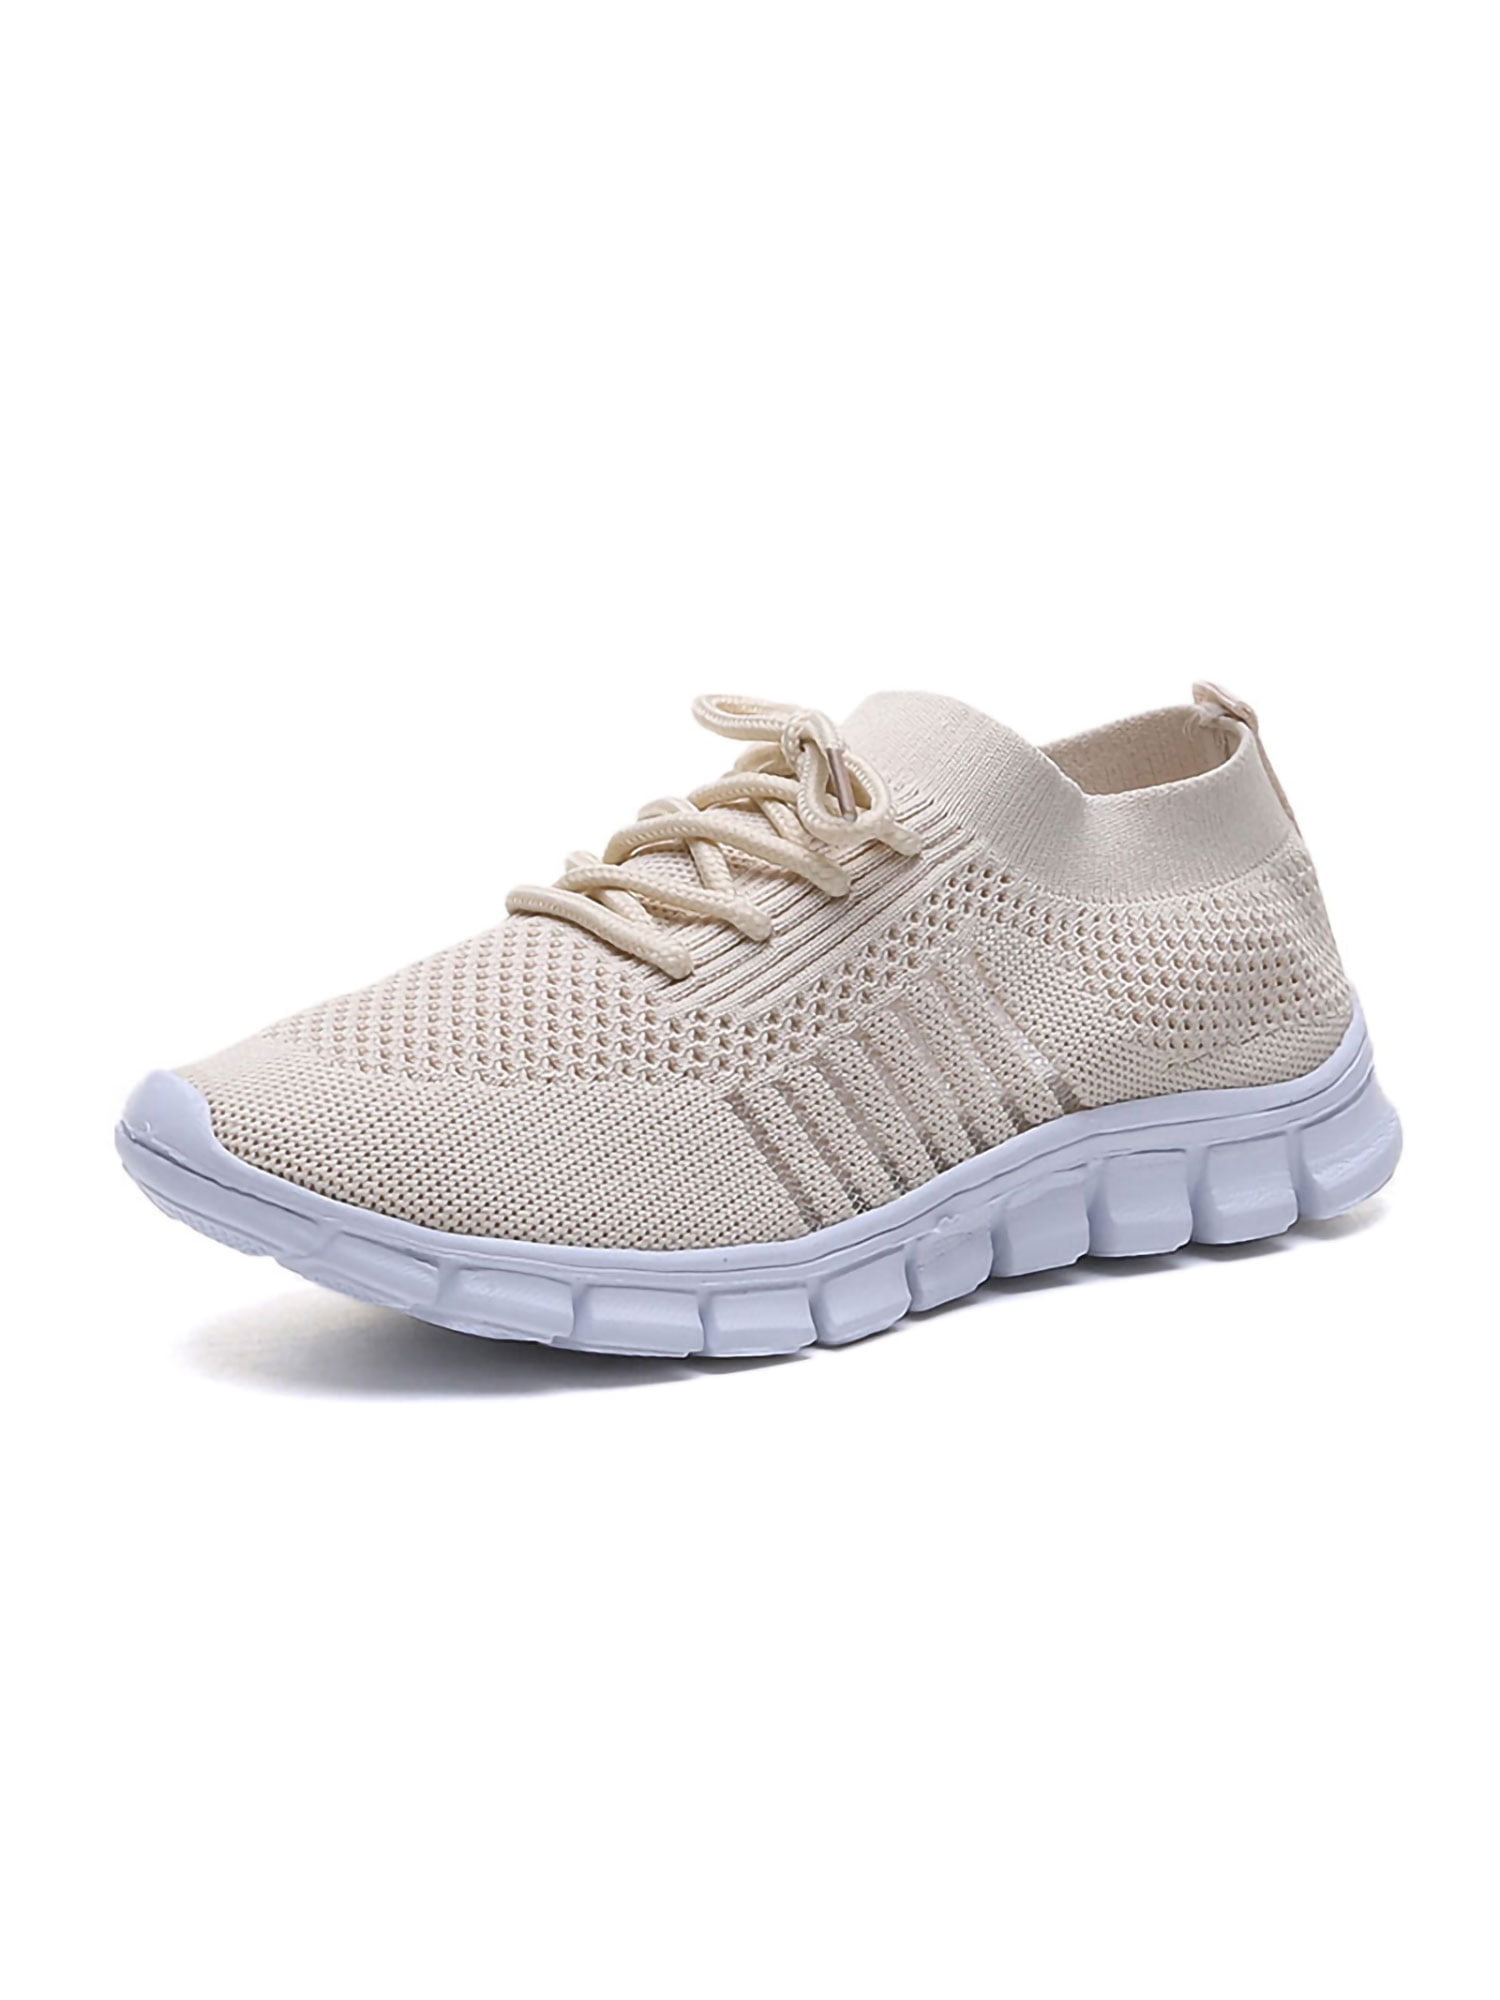 Womens Trainers Lightweight Walking Running Shoes Casual Mesh Breathable Sneakers 